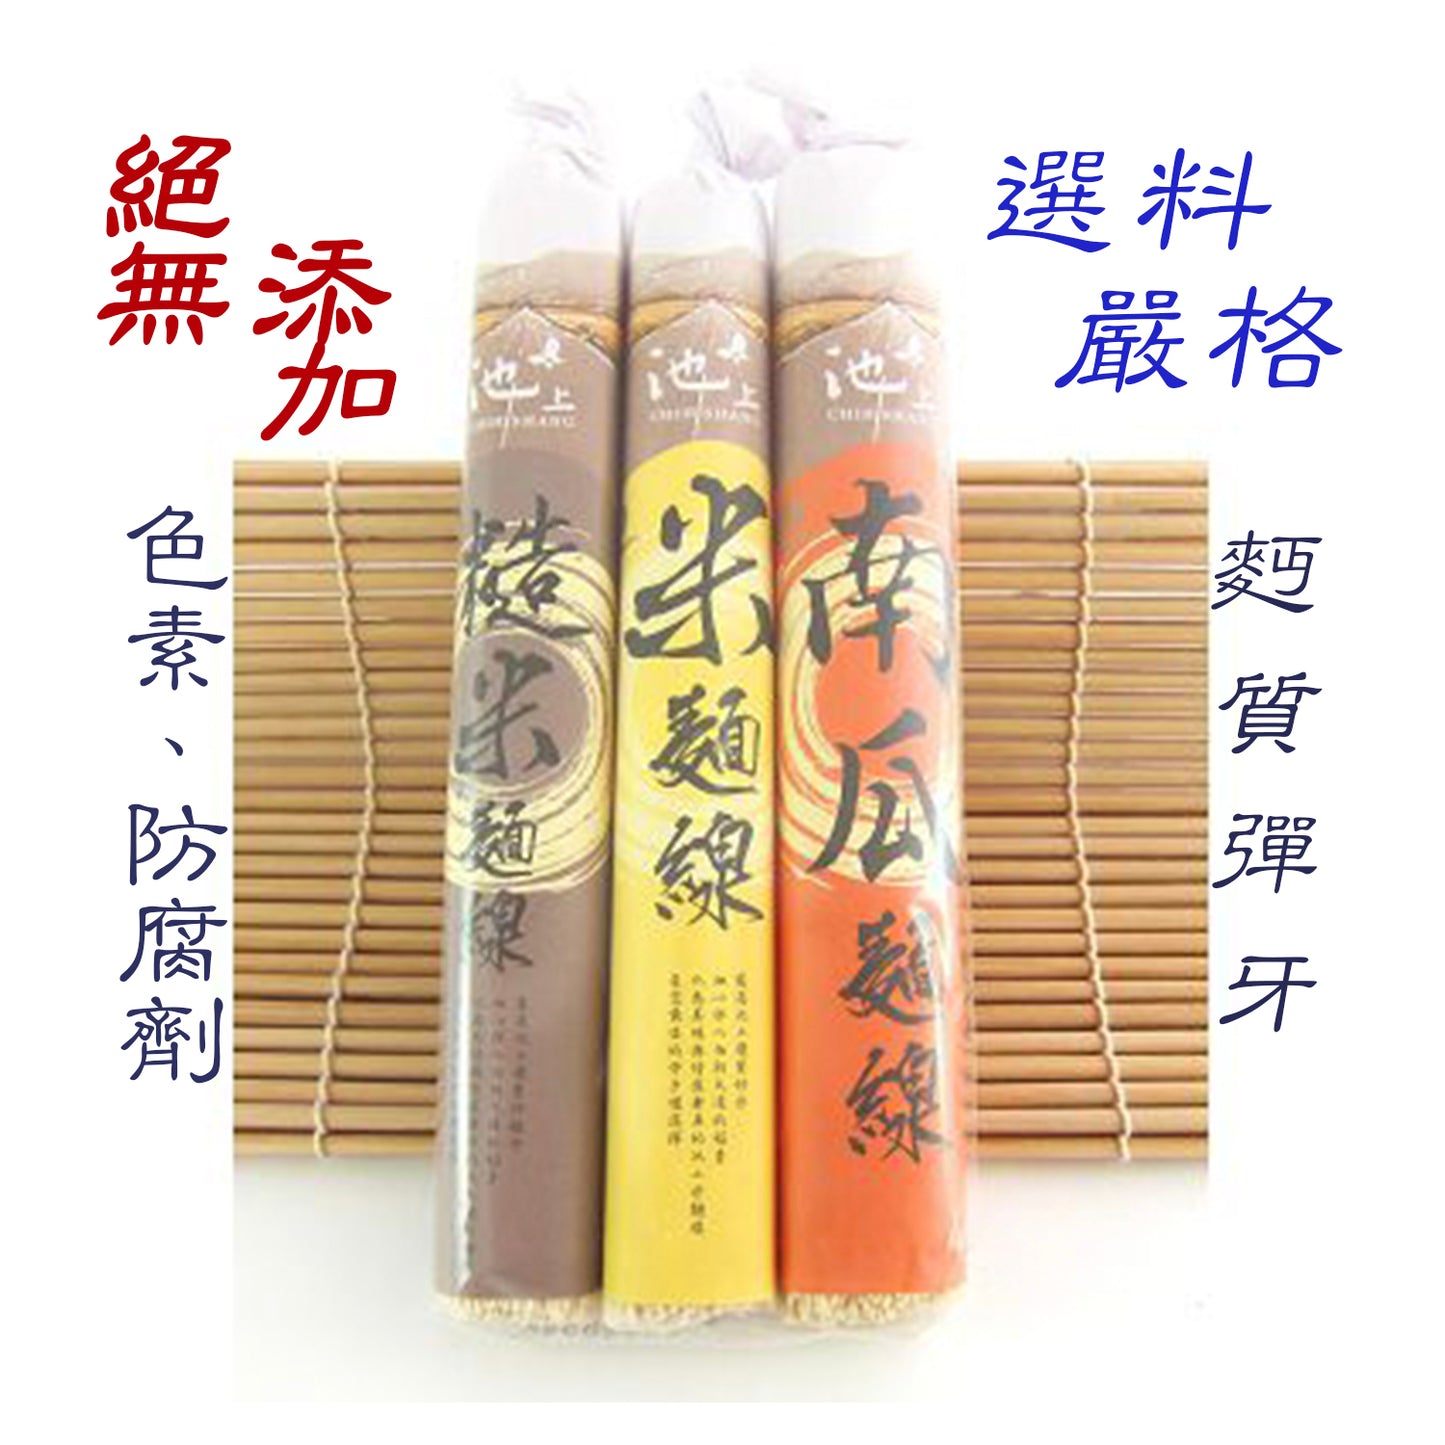 Taiwan Handmade rice noodle (mixed flavour) 池上手工綜合米麵線